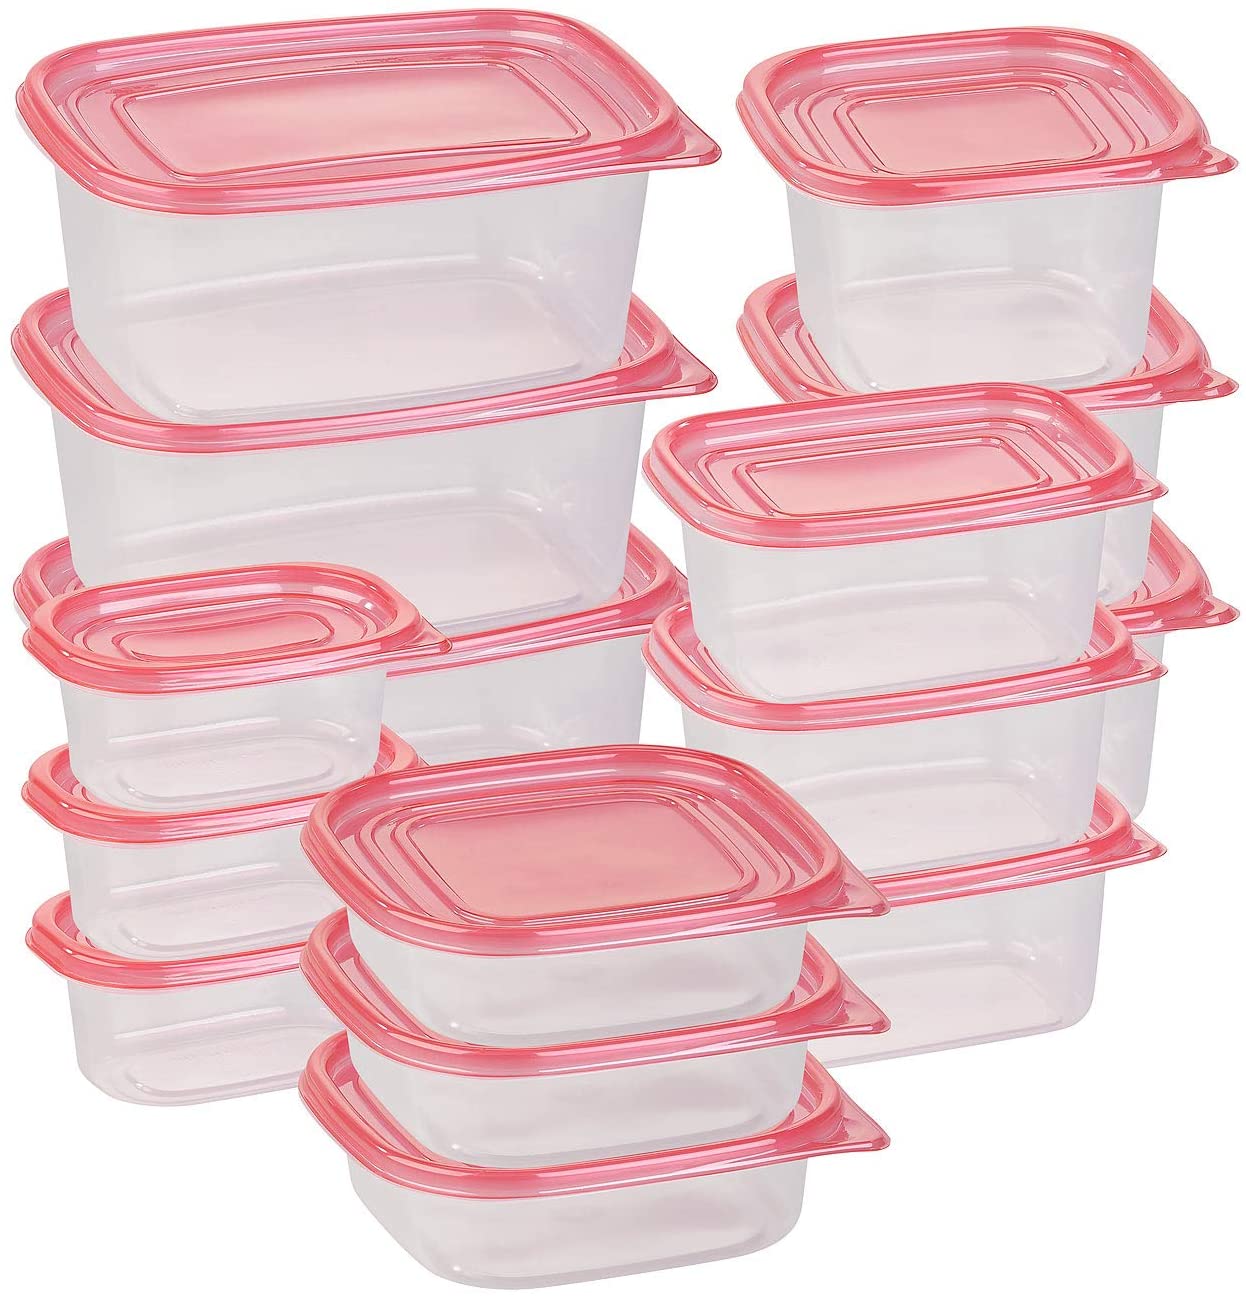 Rosenstein & Söhne Freezer Containers: 30-Piece Basic Food Storage Containers Set, BPA-Free (15 Containers)